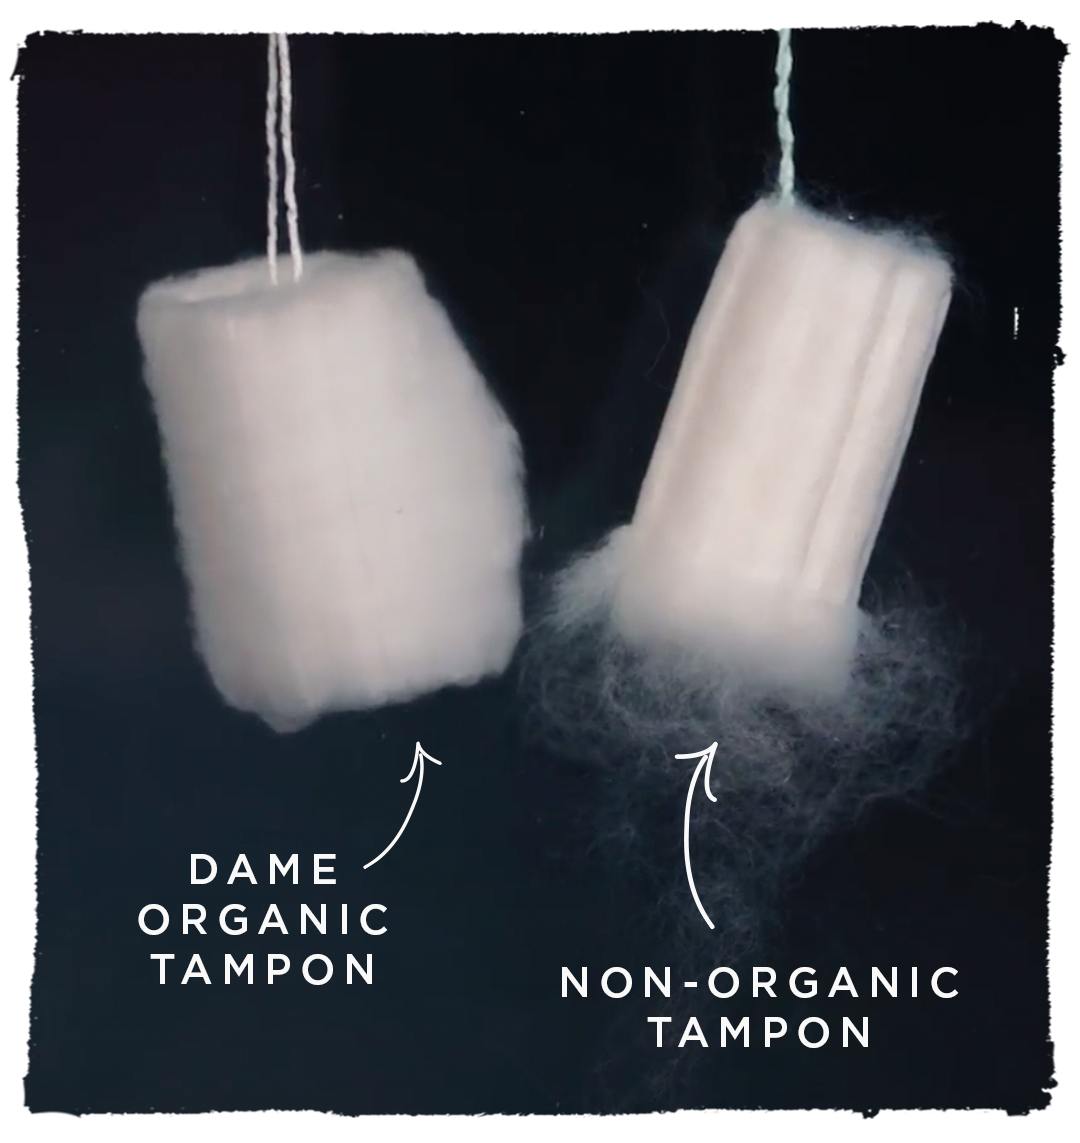 Do Tampons Expire? How Long Can You Store Them?